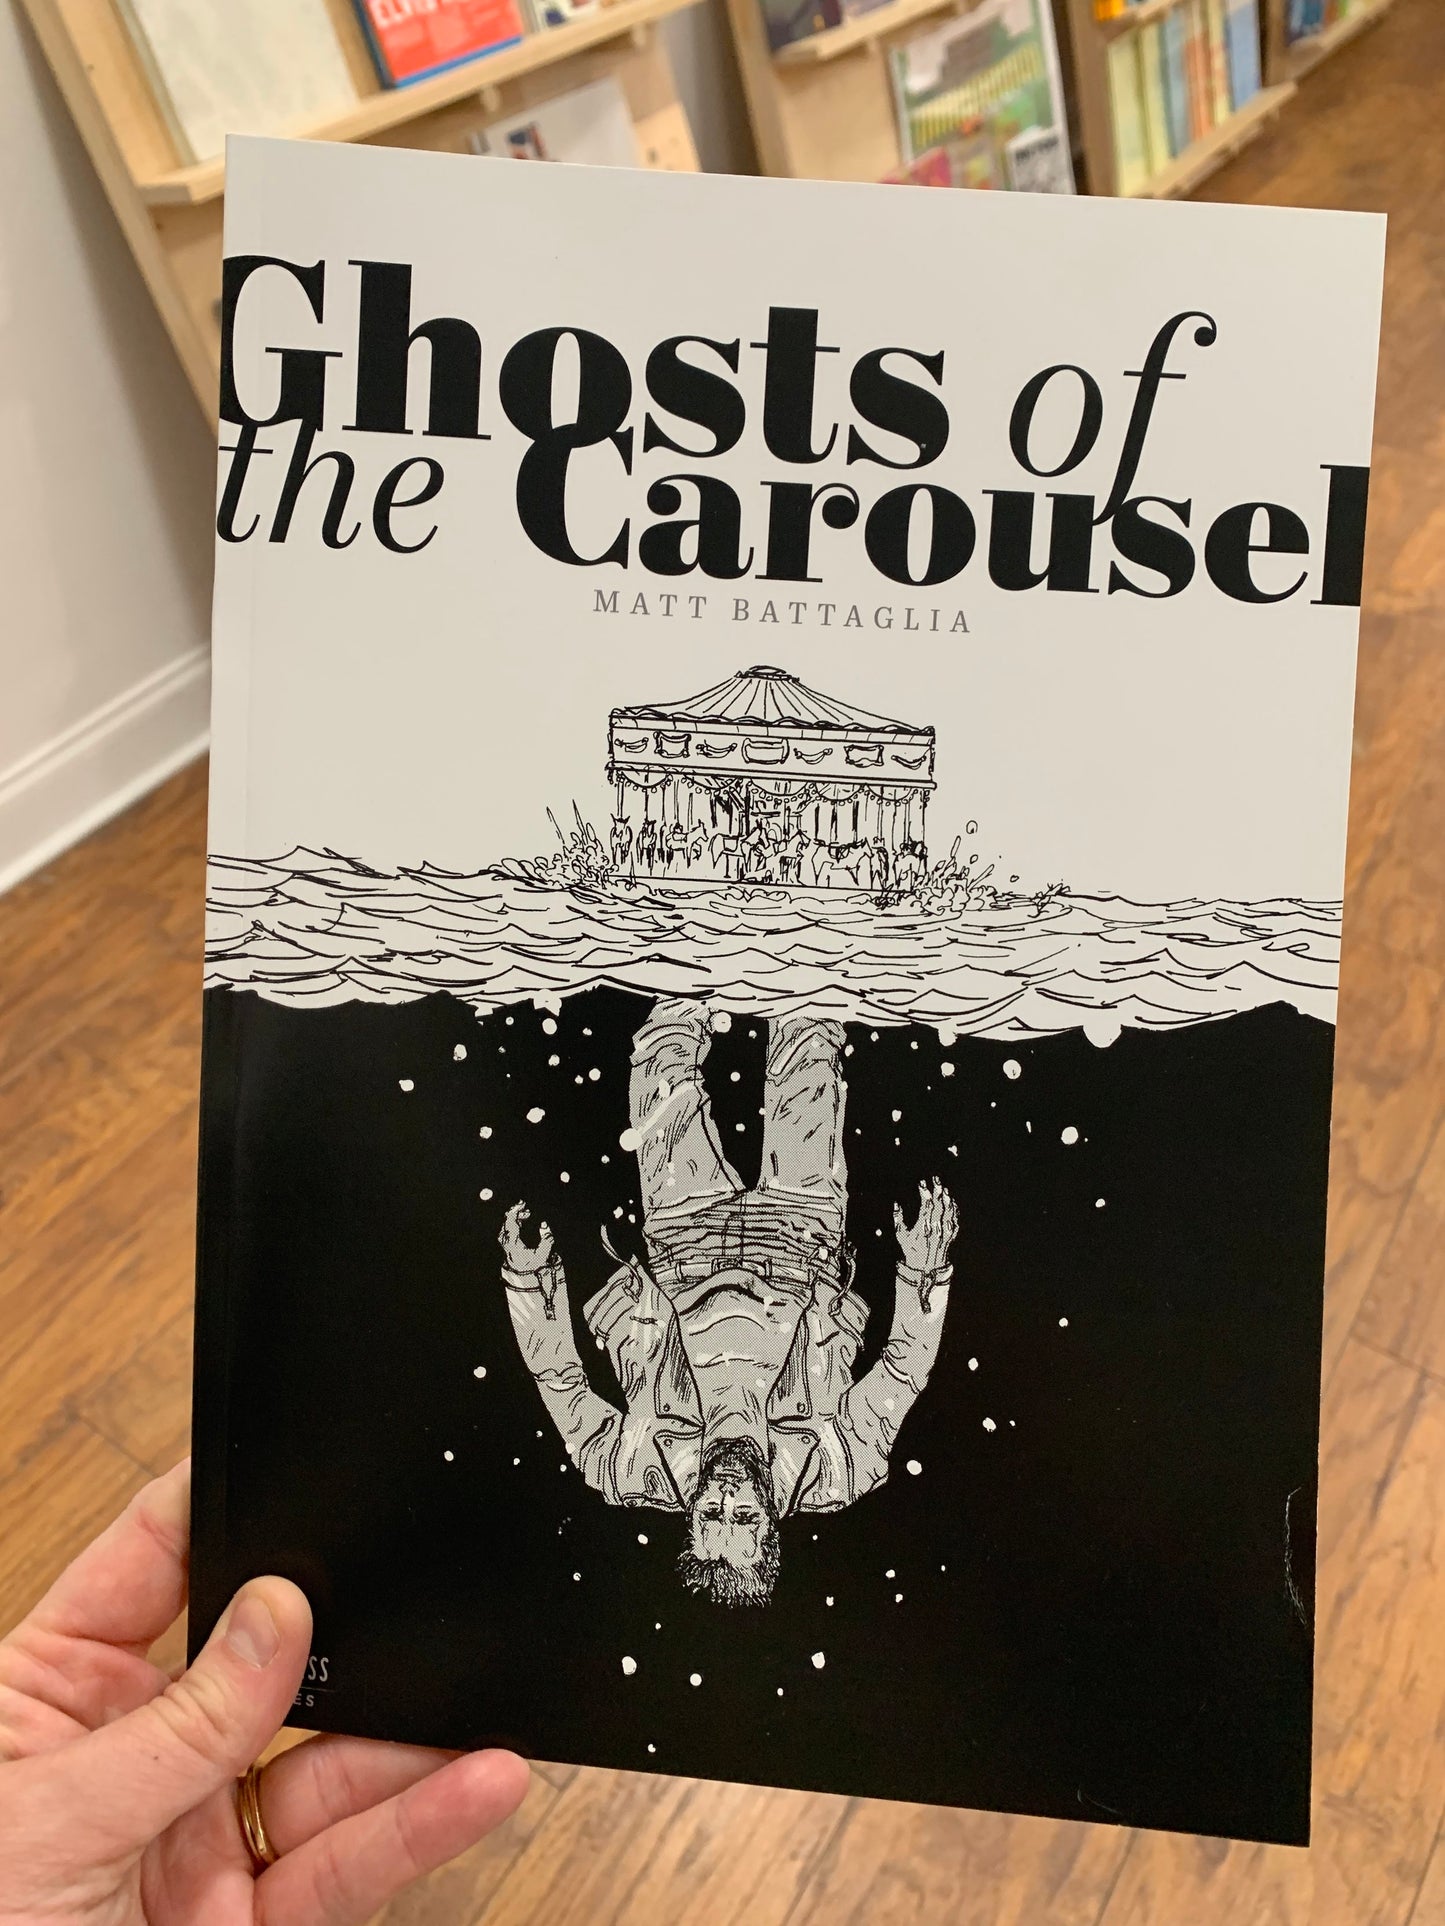 Ghosts of the Carousel